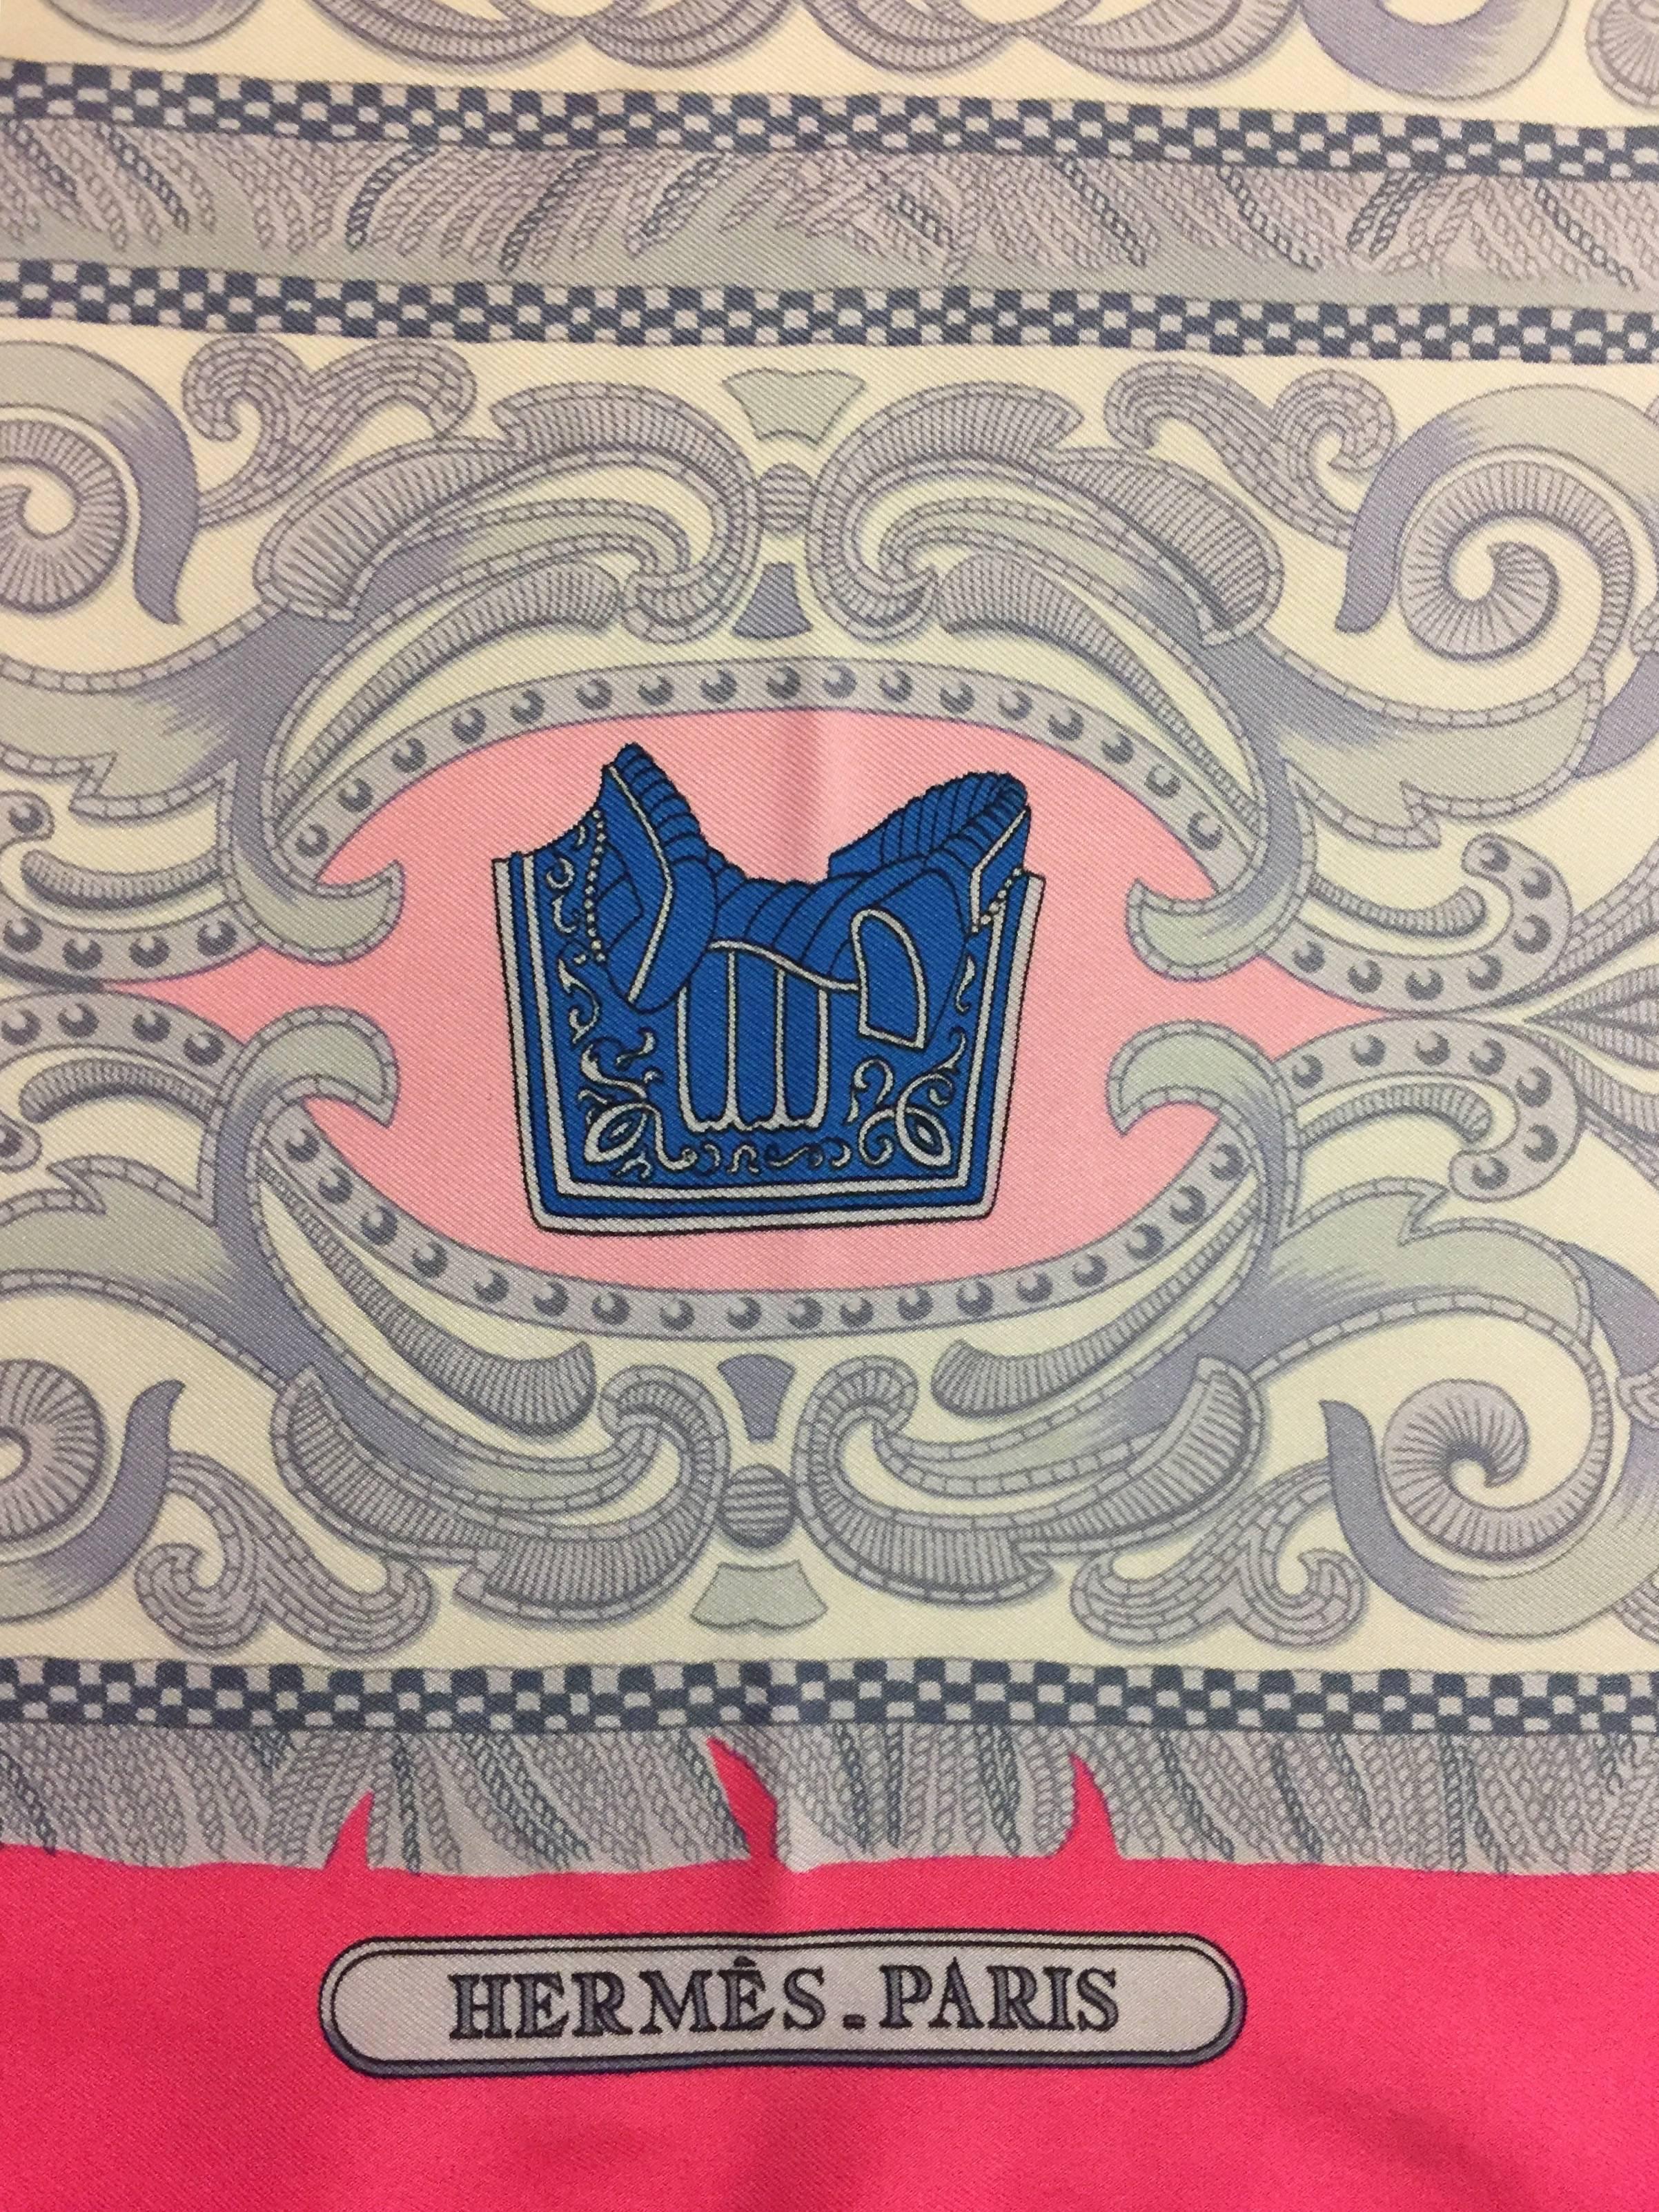 Beautiful Hermes Vintage 1970's Silk Twill scarf in the La Presentation pattern.  This scarf features a Hot Pink border and white background with printed equestrian vignettes in grey, blue and brown. At the top, on the Hot Pink border, the name of